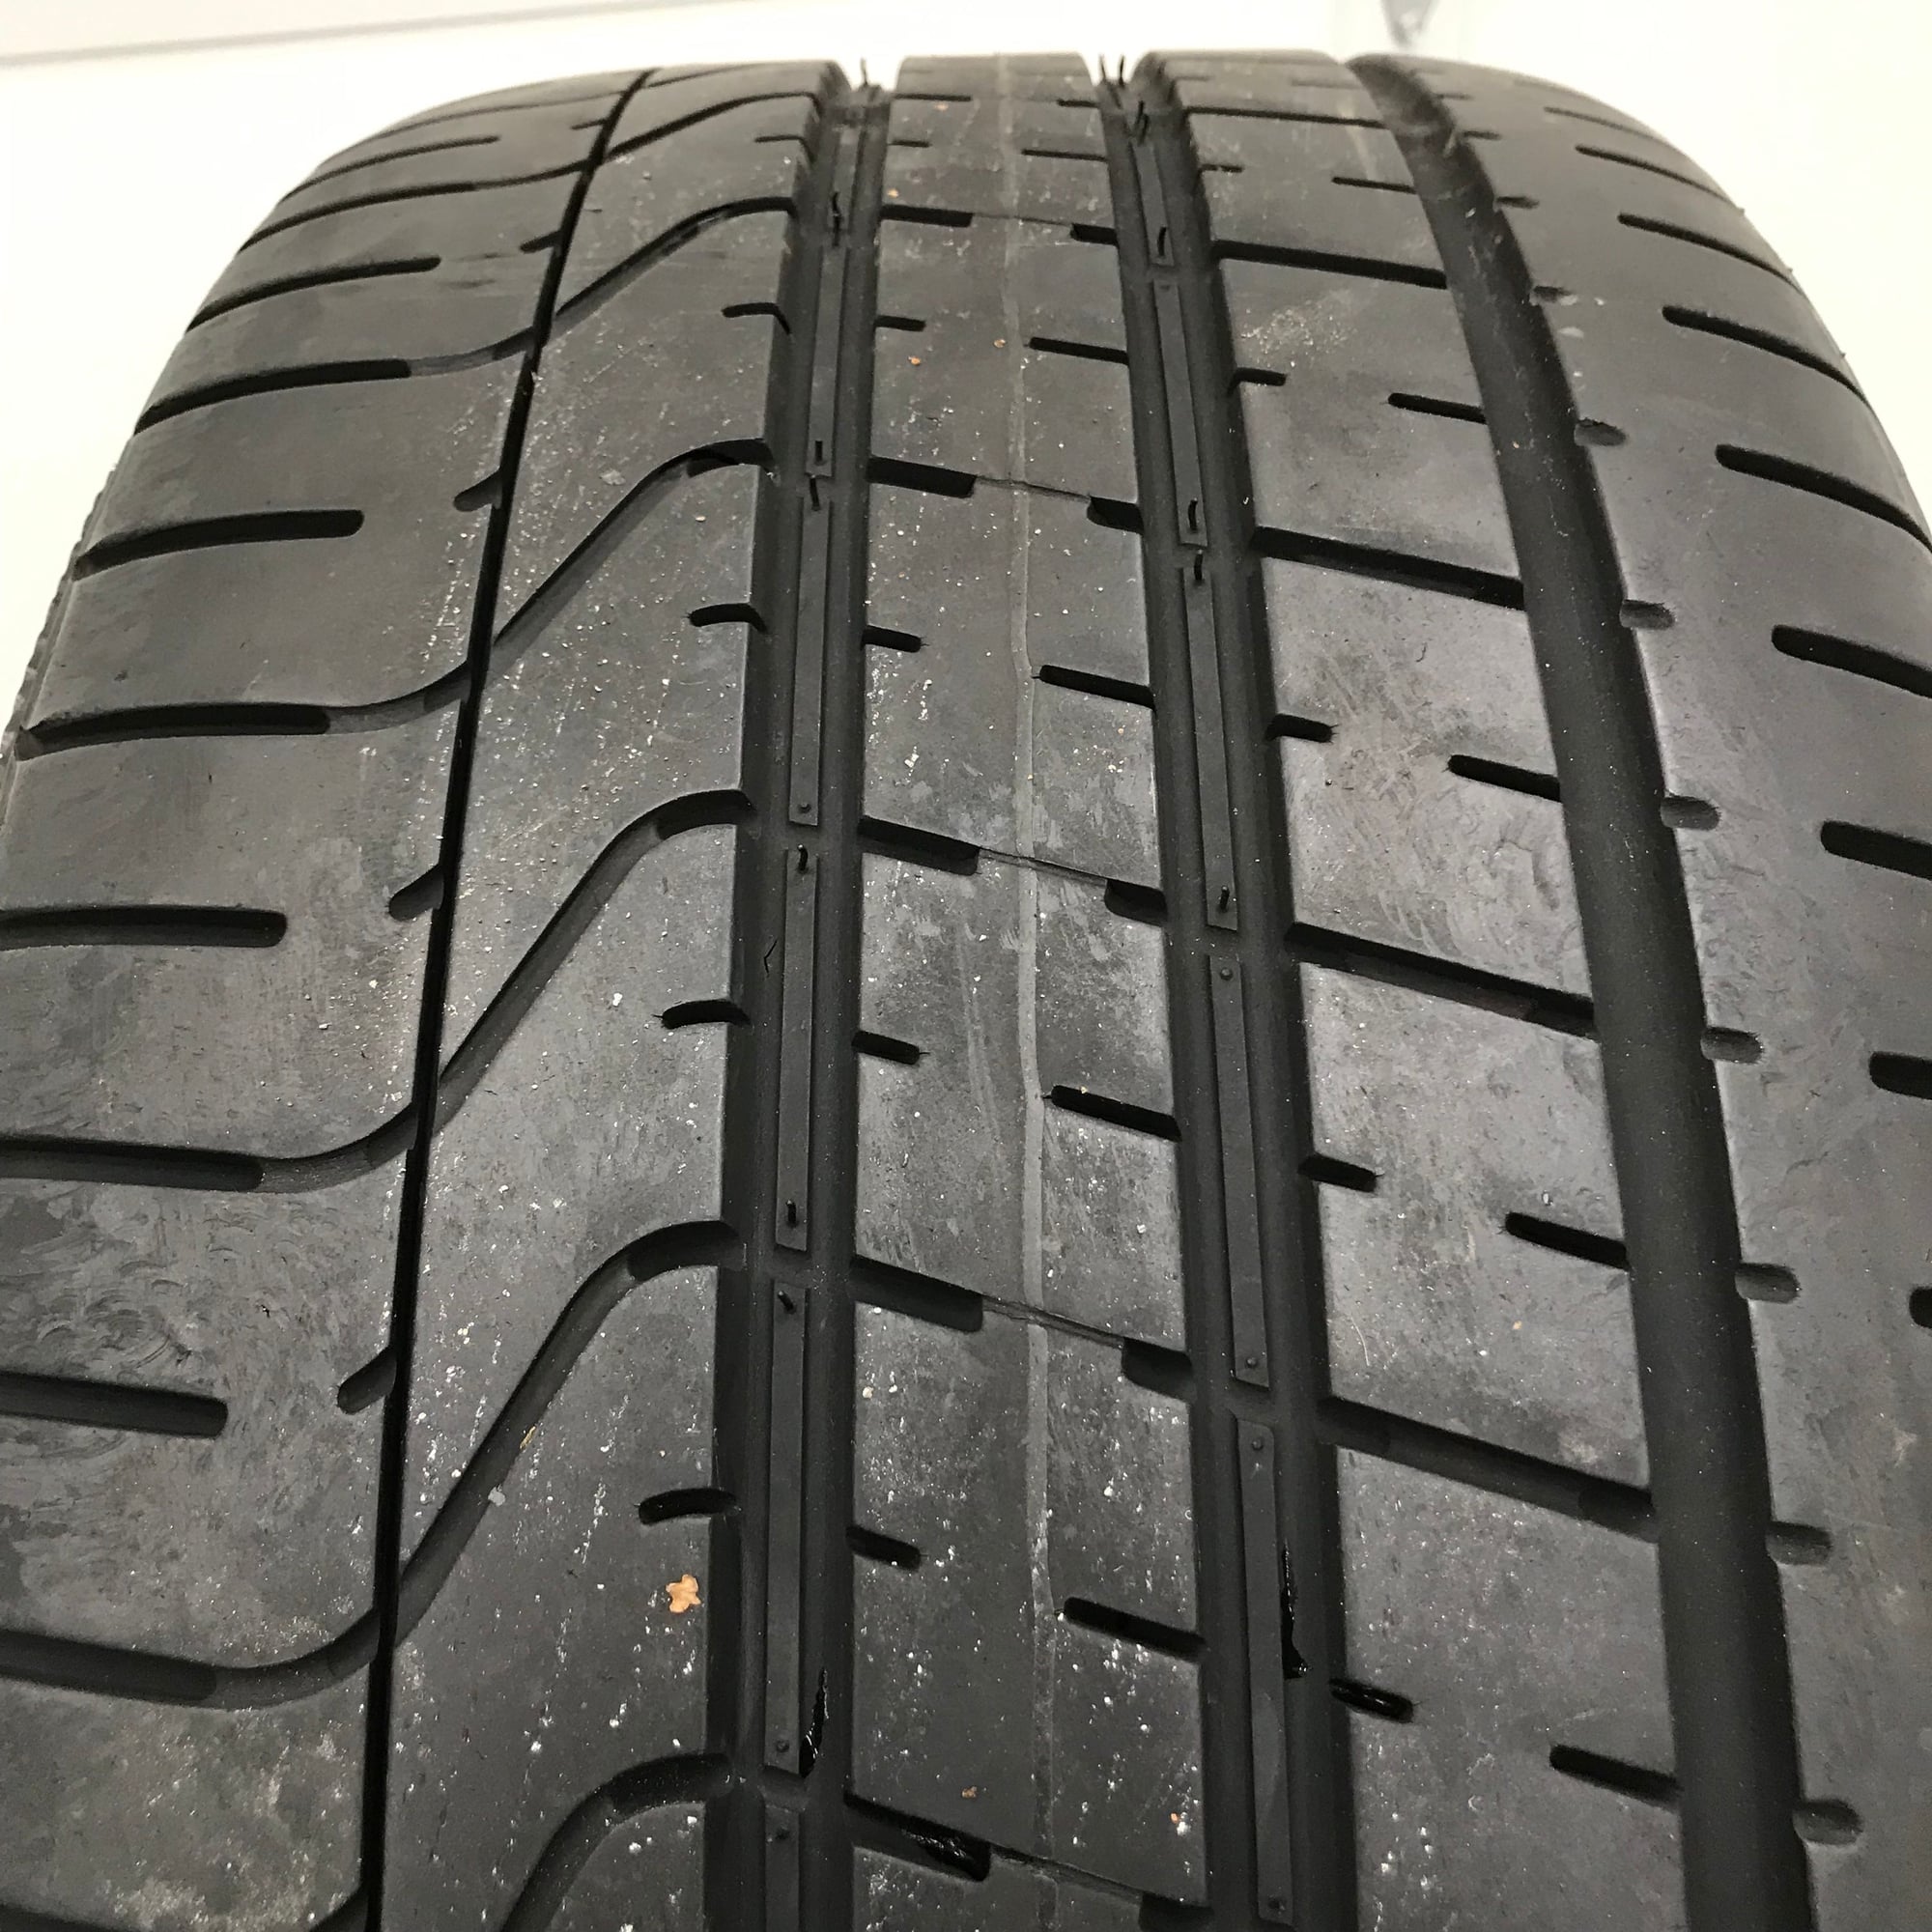 Wheels and Tires/Axles - Genuine 20" Rinspeed wheels with near new Pirelli P-Zero summer tires - Used - 2006 to 2019 Porsche Cayenne - Beaverton, OR 97005, United States